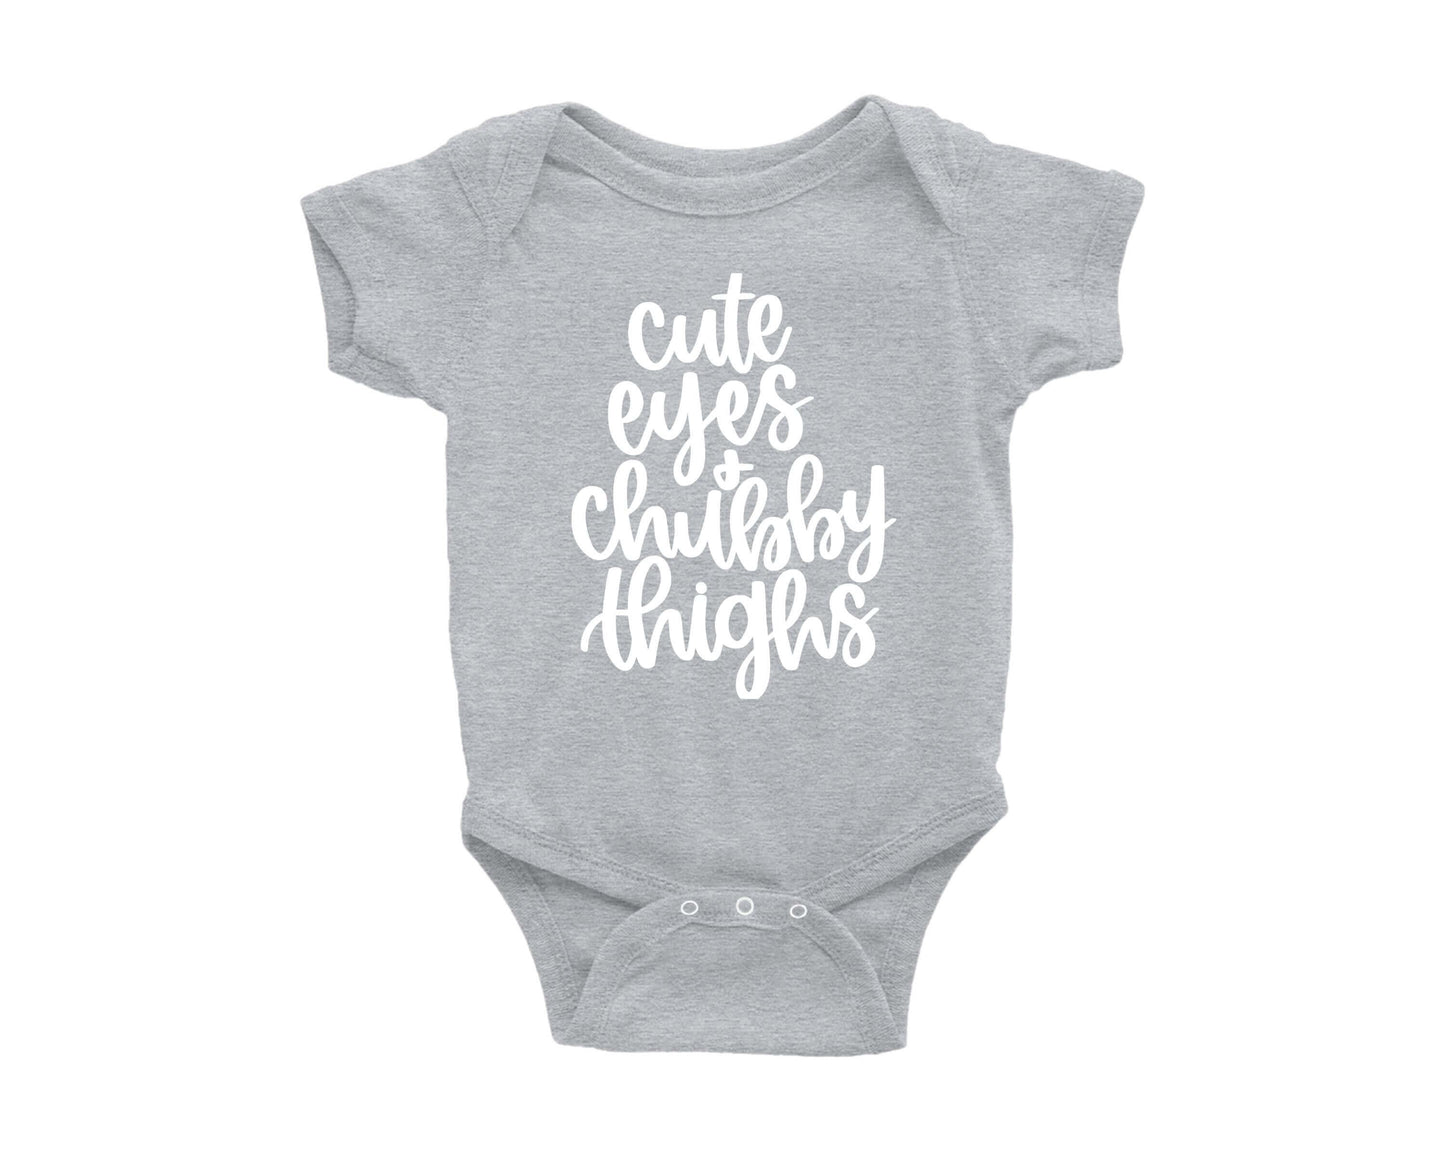 Cute Eyes and Chubby Thighs Onesie - Crystal Rose Design Co.